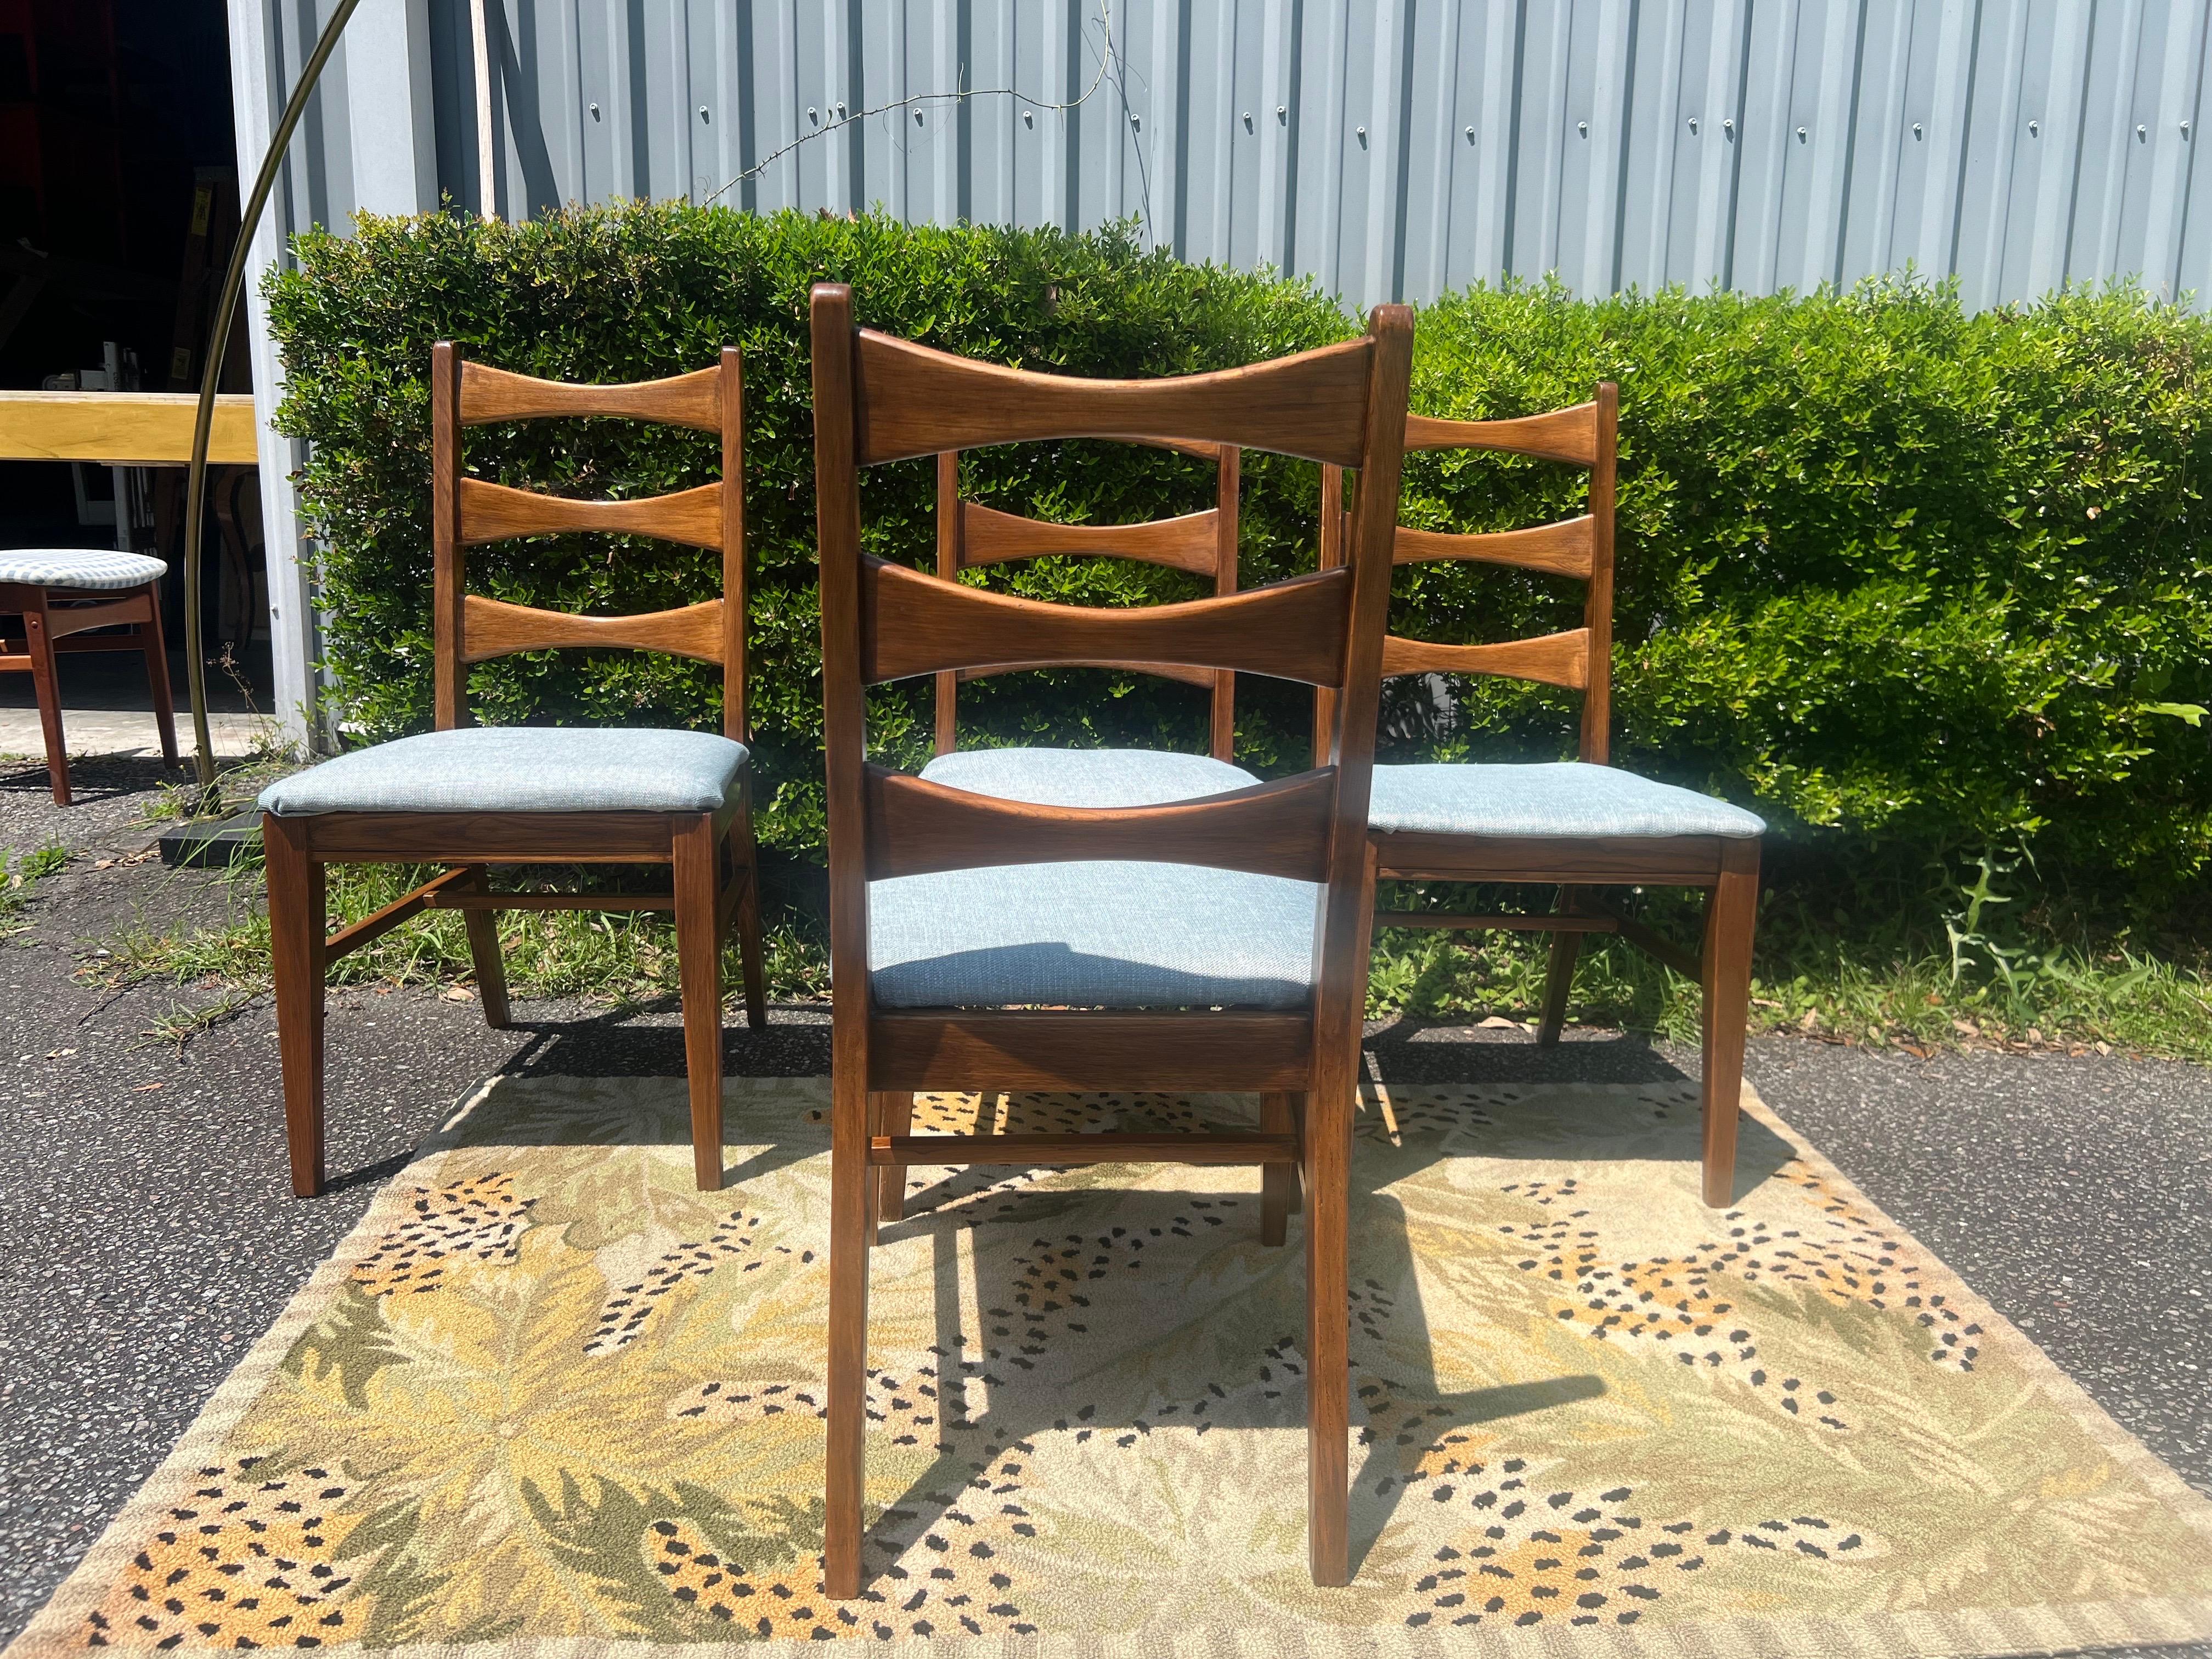 Upholstery 1960s Mid-Century Modern Lane Rhythm Style Dining Chairs - Set of 4